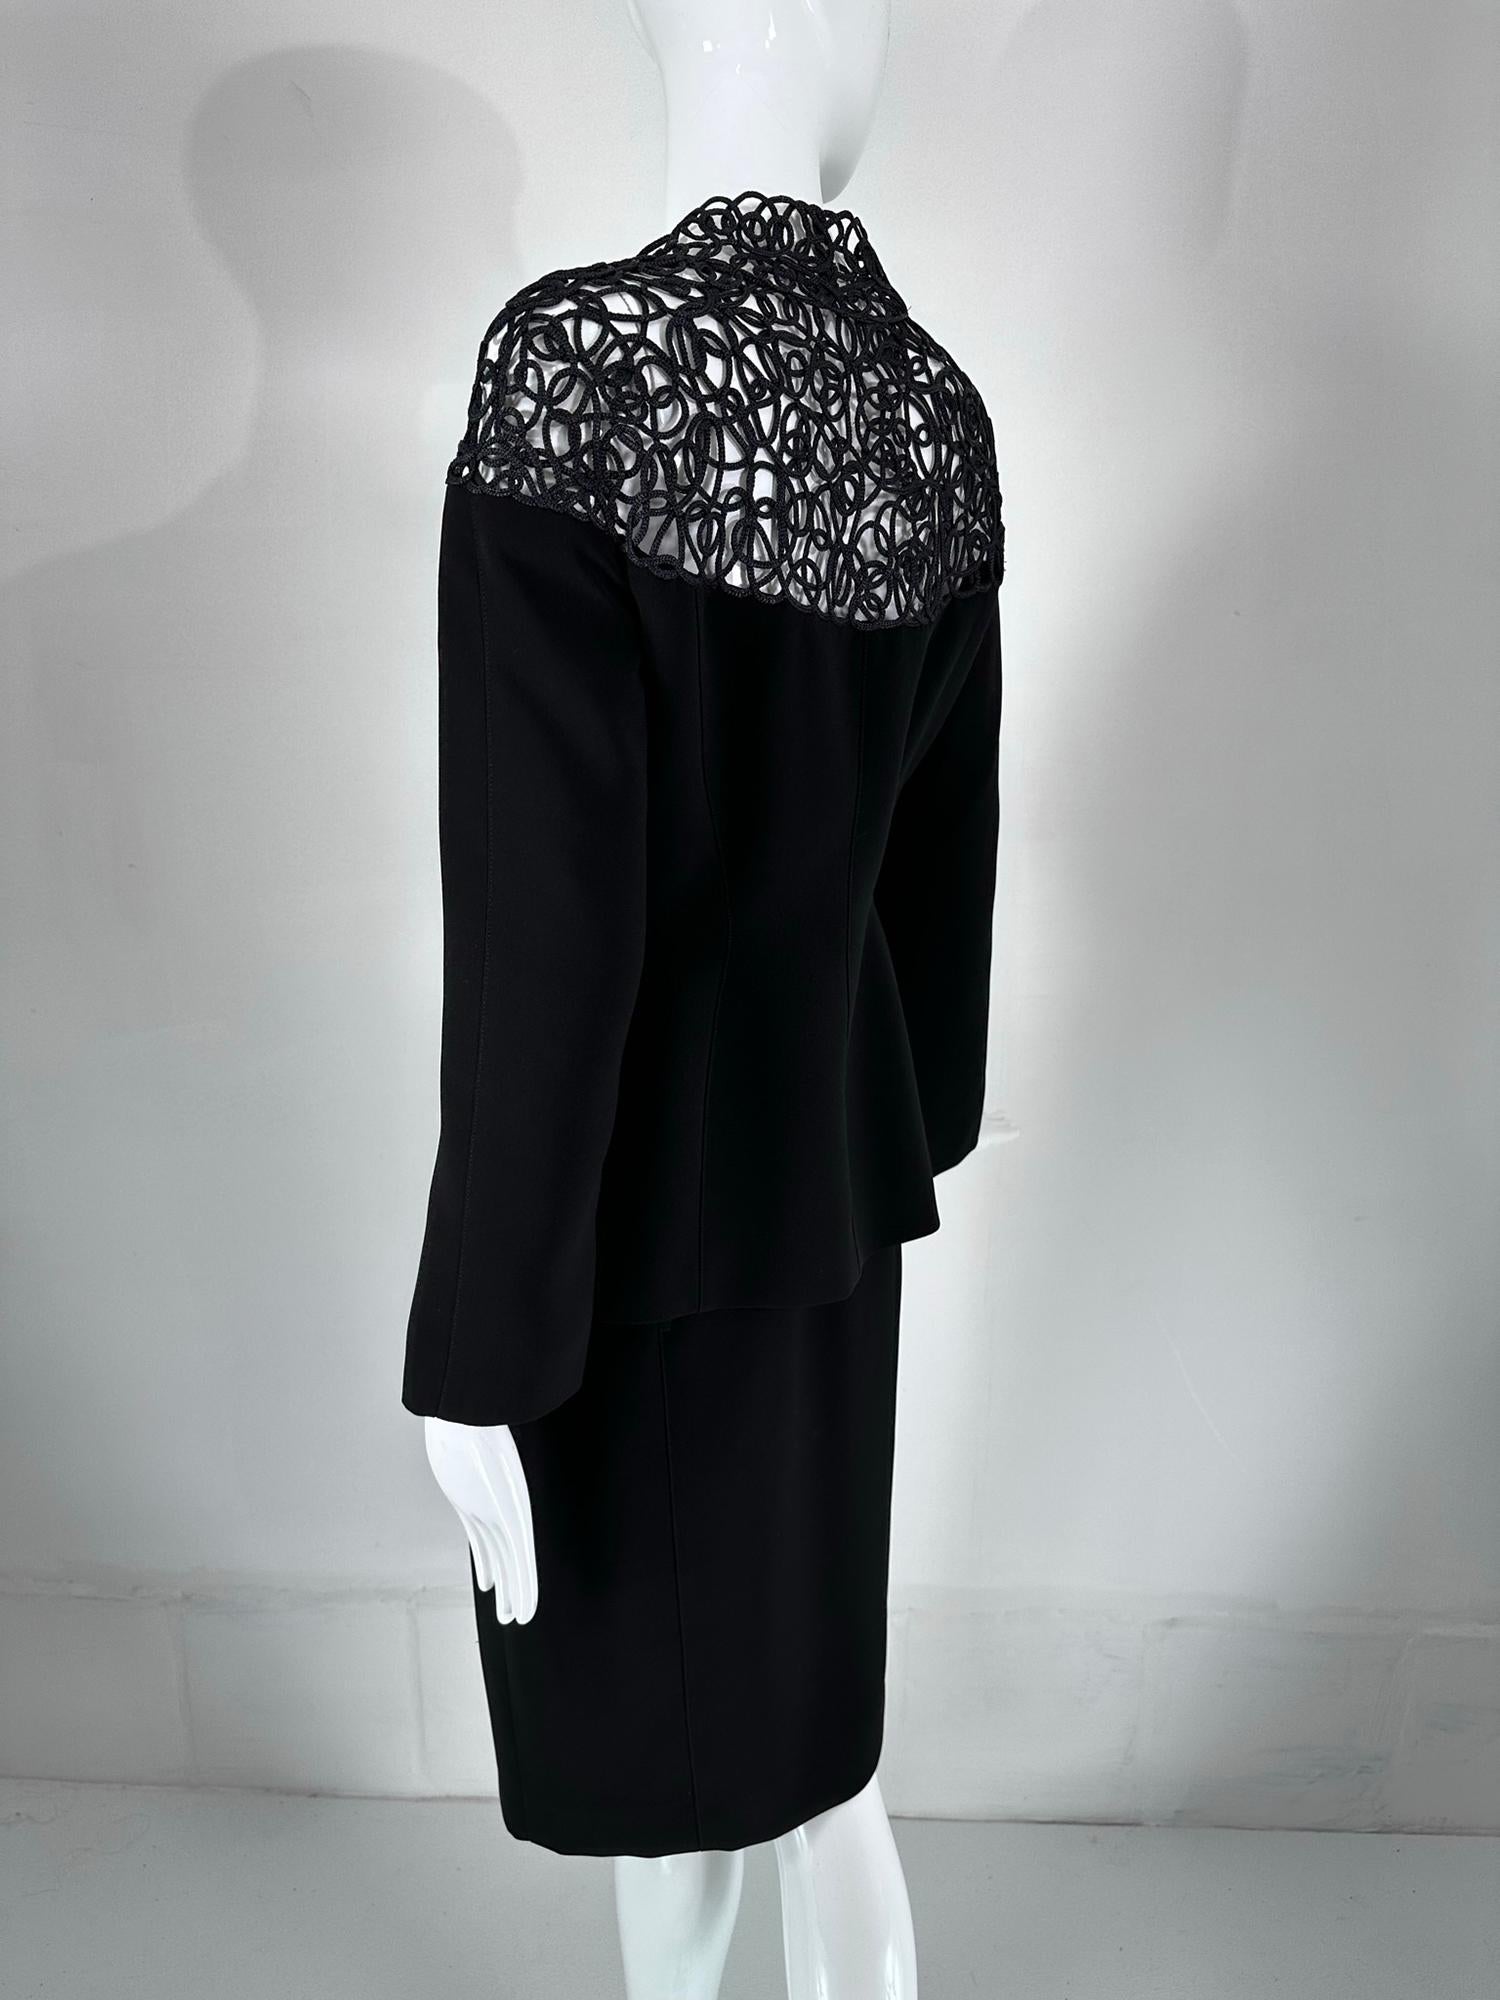 Thierry Mugler Black Cord Lace Hourglass Jacket & Skirt Set  1980s  40 For Sale 3